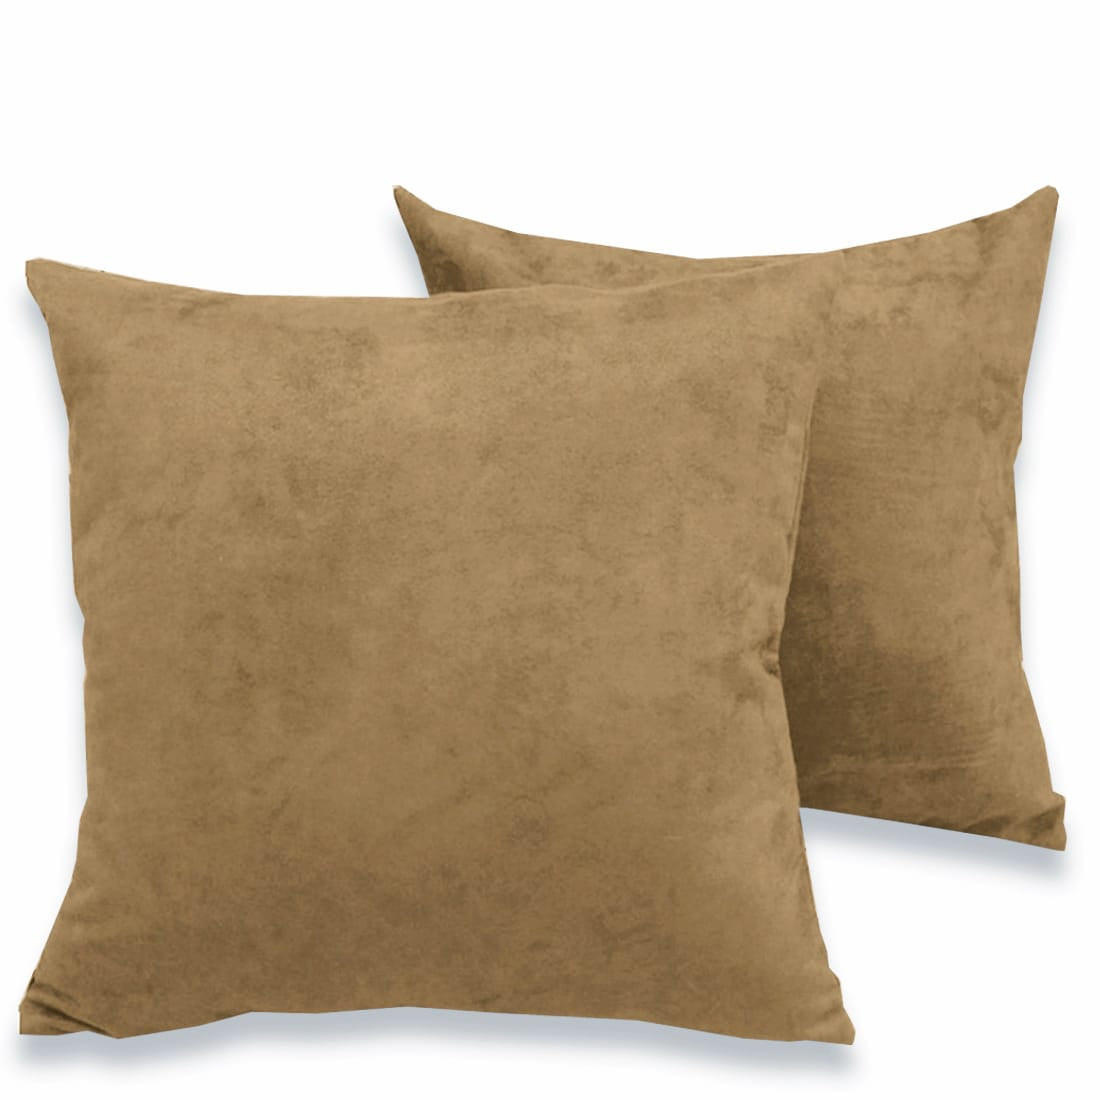 Luxurious Microfiber Suede Velvet Cushion Cover Set in Camel Brown online in India